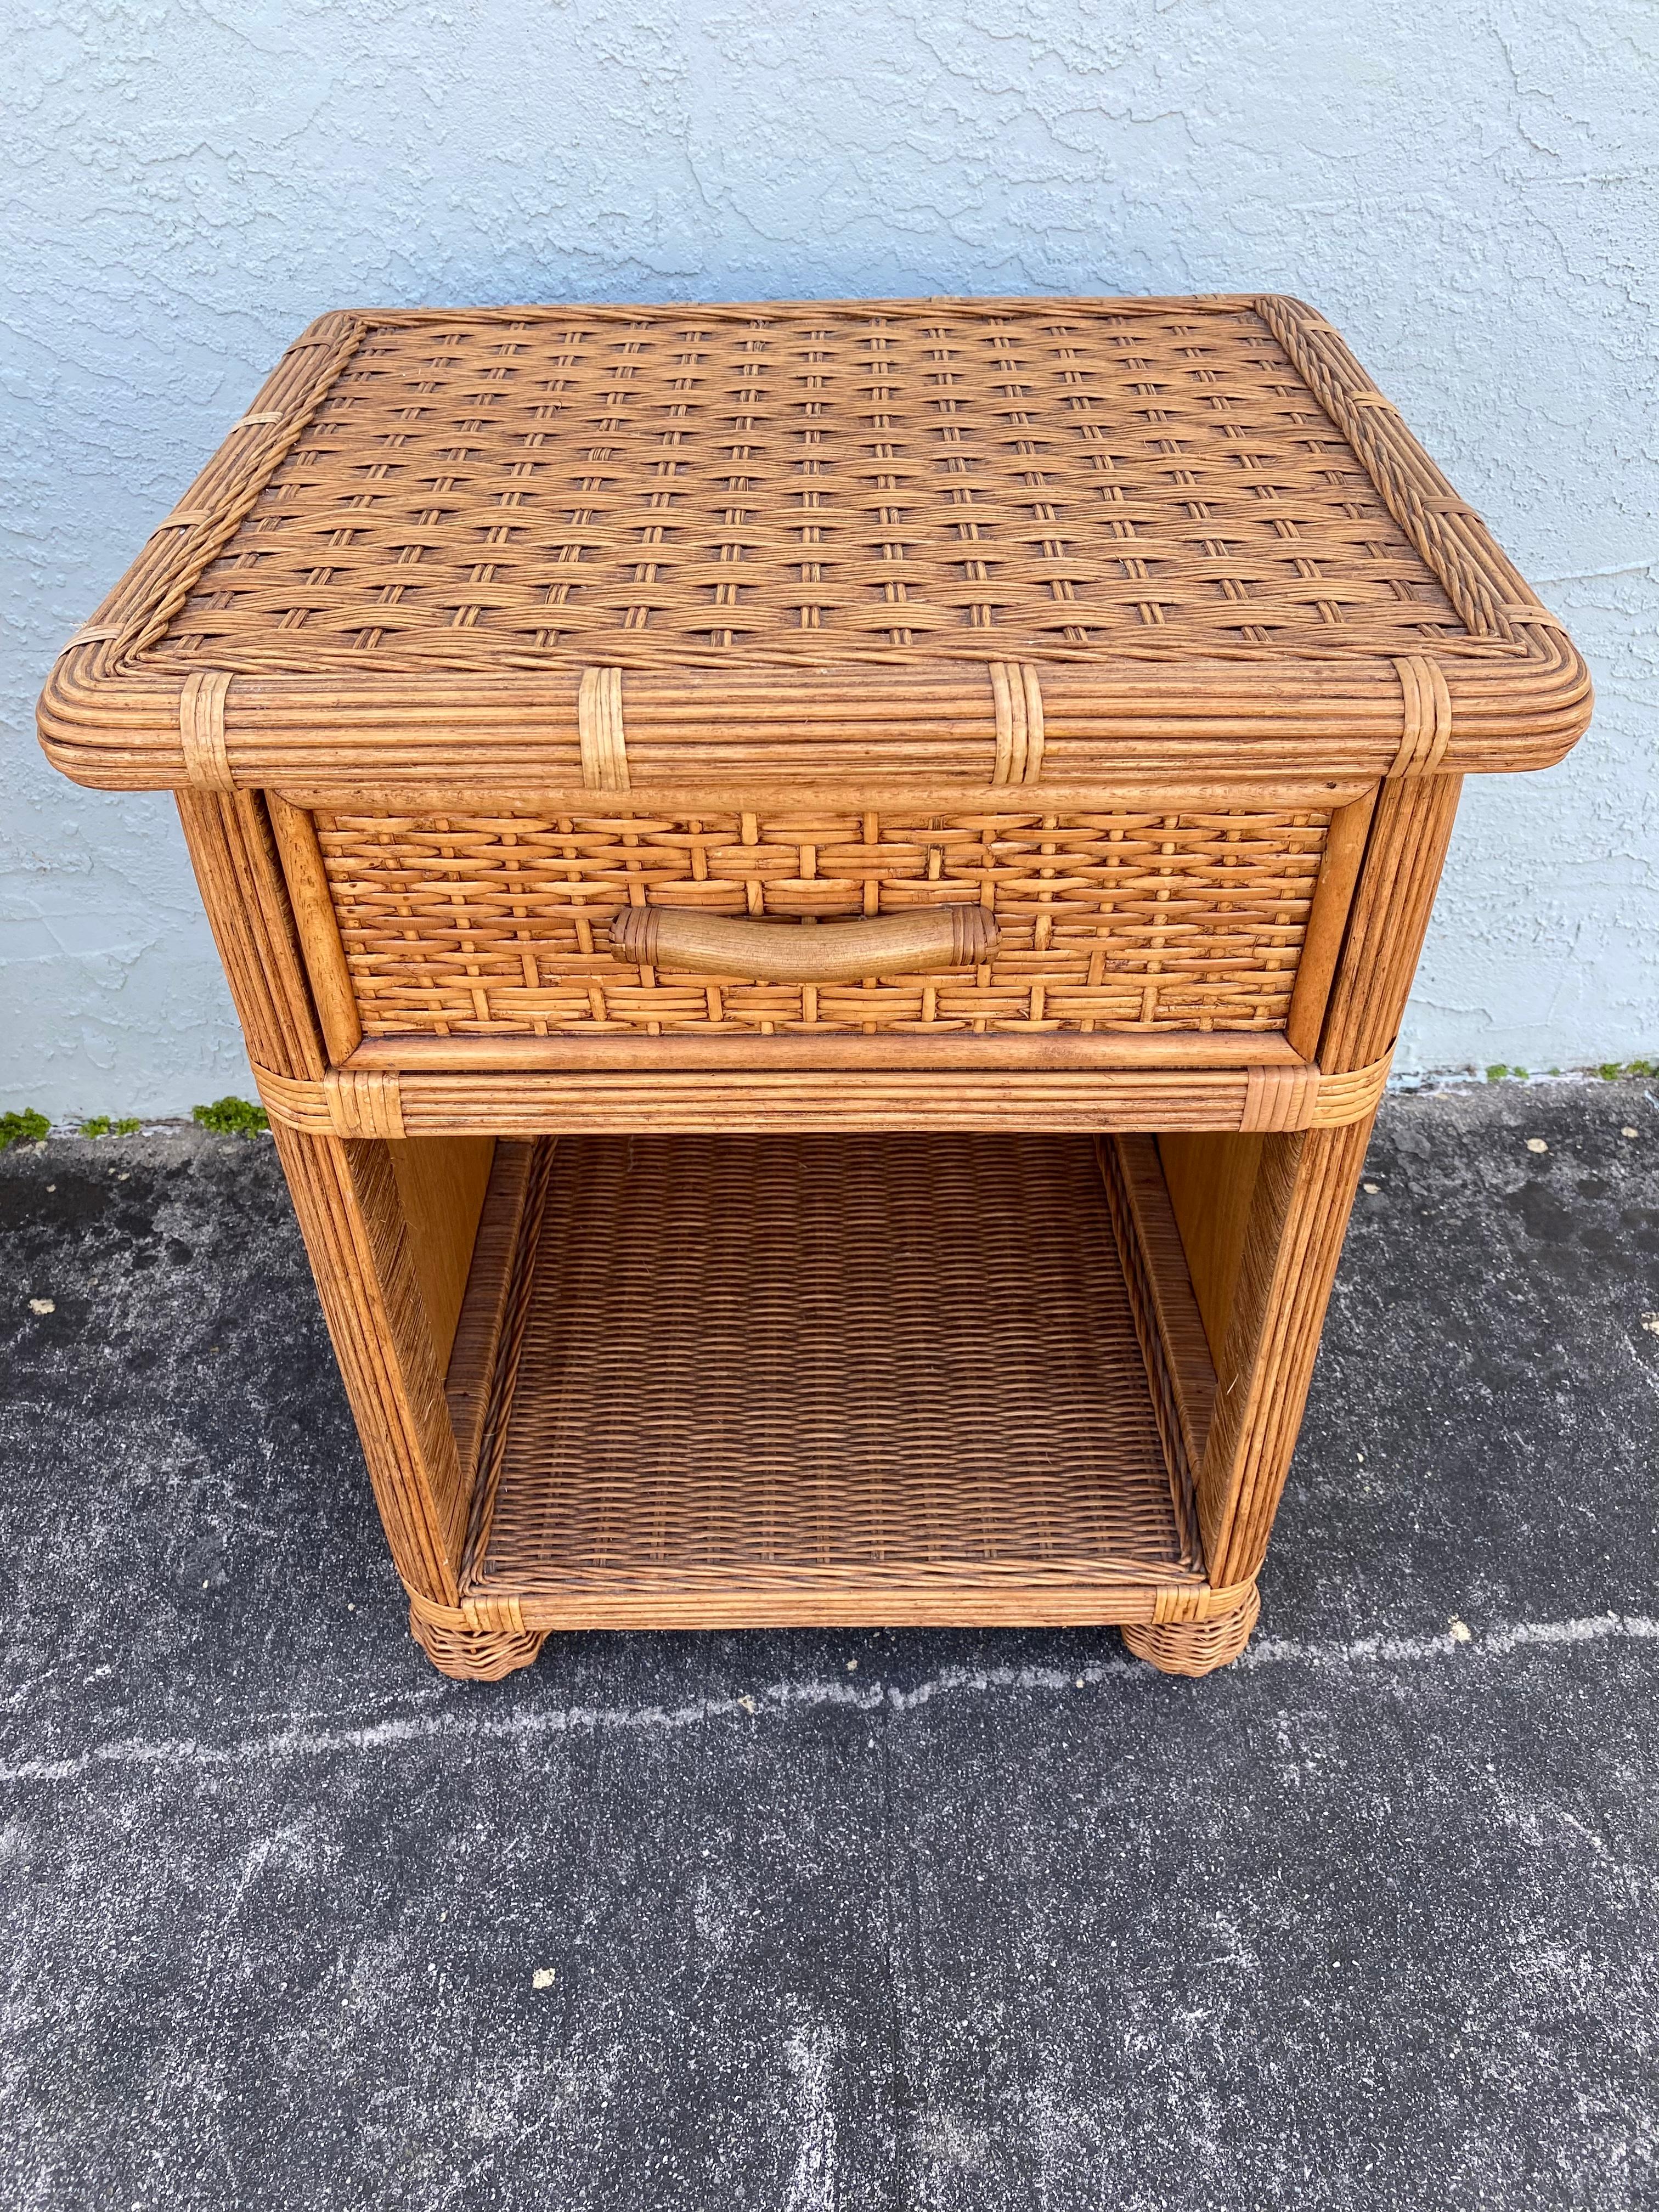 1970s Rattan Wicker End Tables Night Stands, Set of 2 For Sale 3